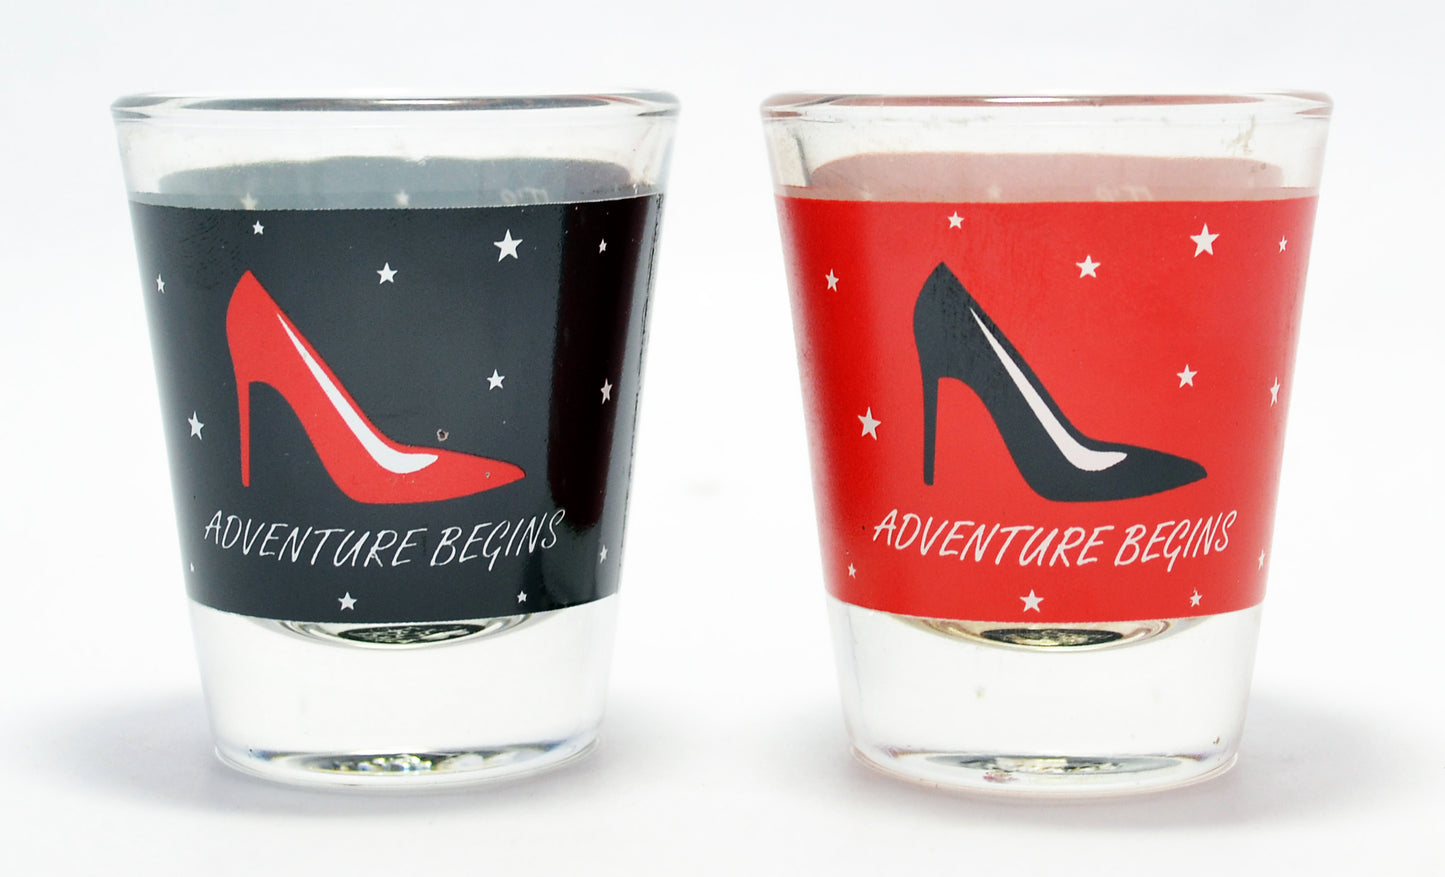 Load image into Gallery viewer, Ladies Night Shot Glass (set of 2)
